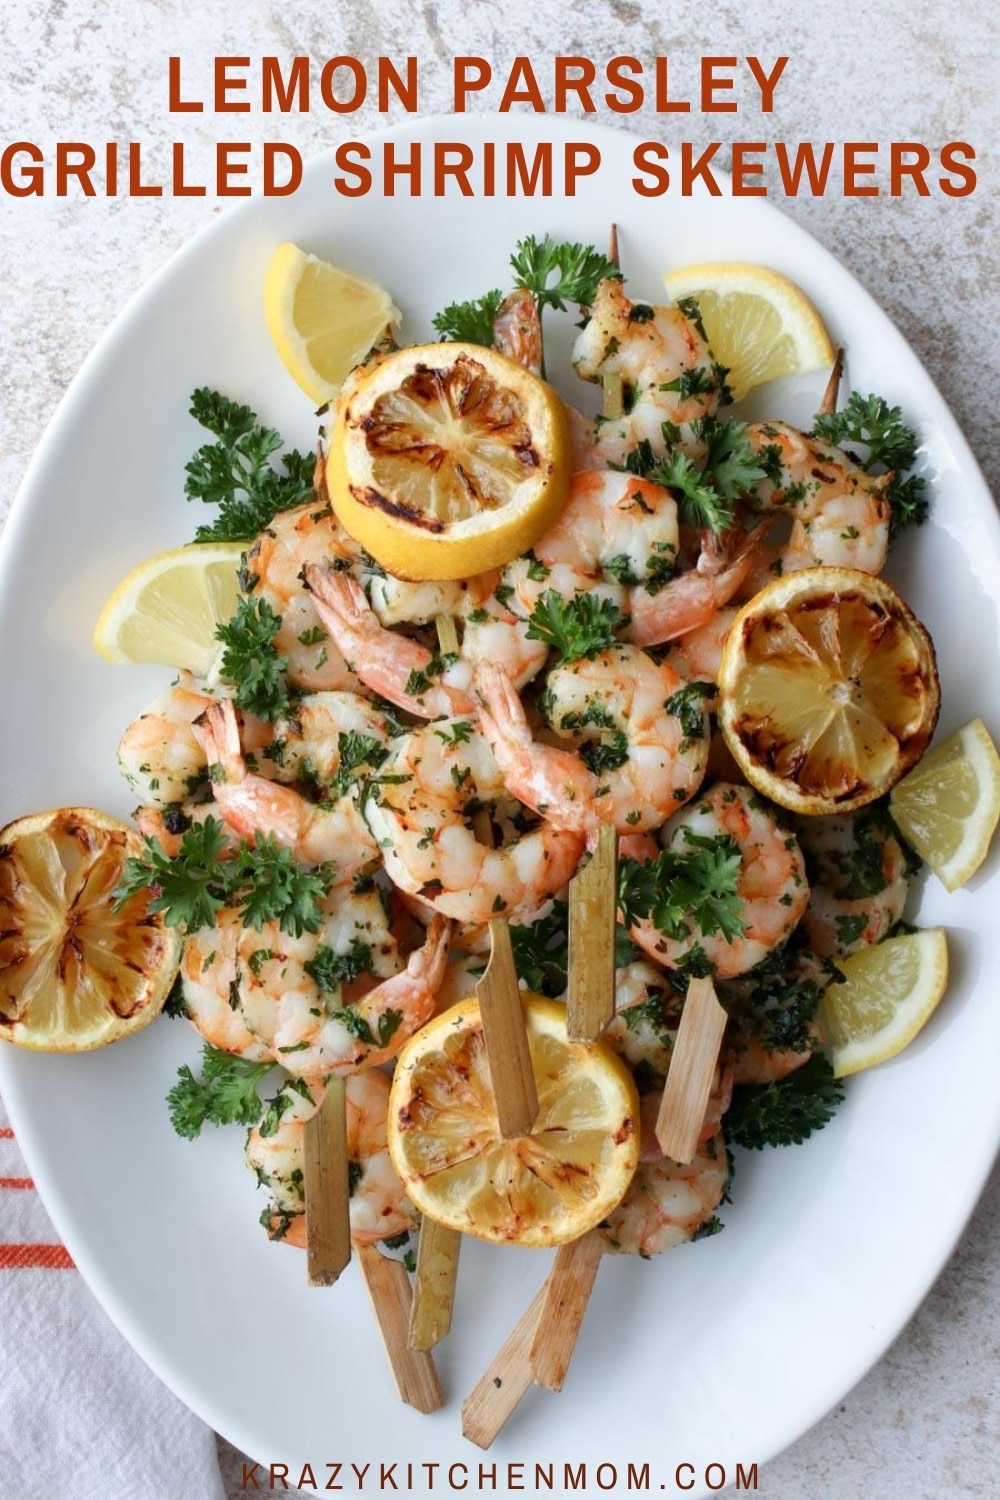 Juicy, crispy, lemony, herb quick-cooking grill shrimp is an easy weekend night or weekend meal. Serve them as an appetizer or a main meal.  via @krazykitchenmom